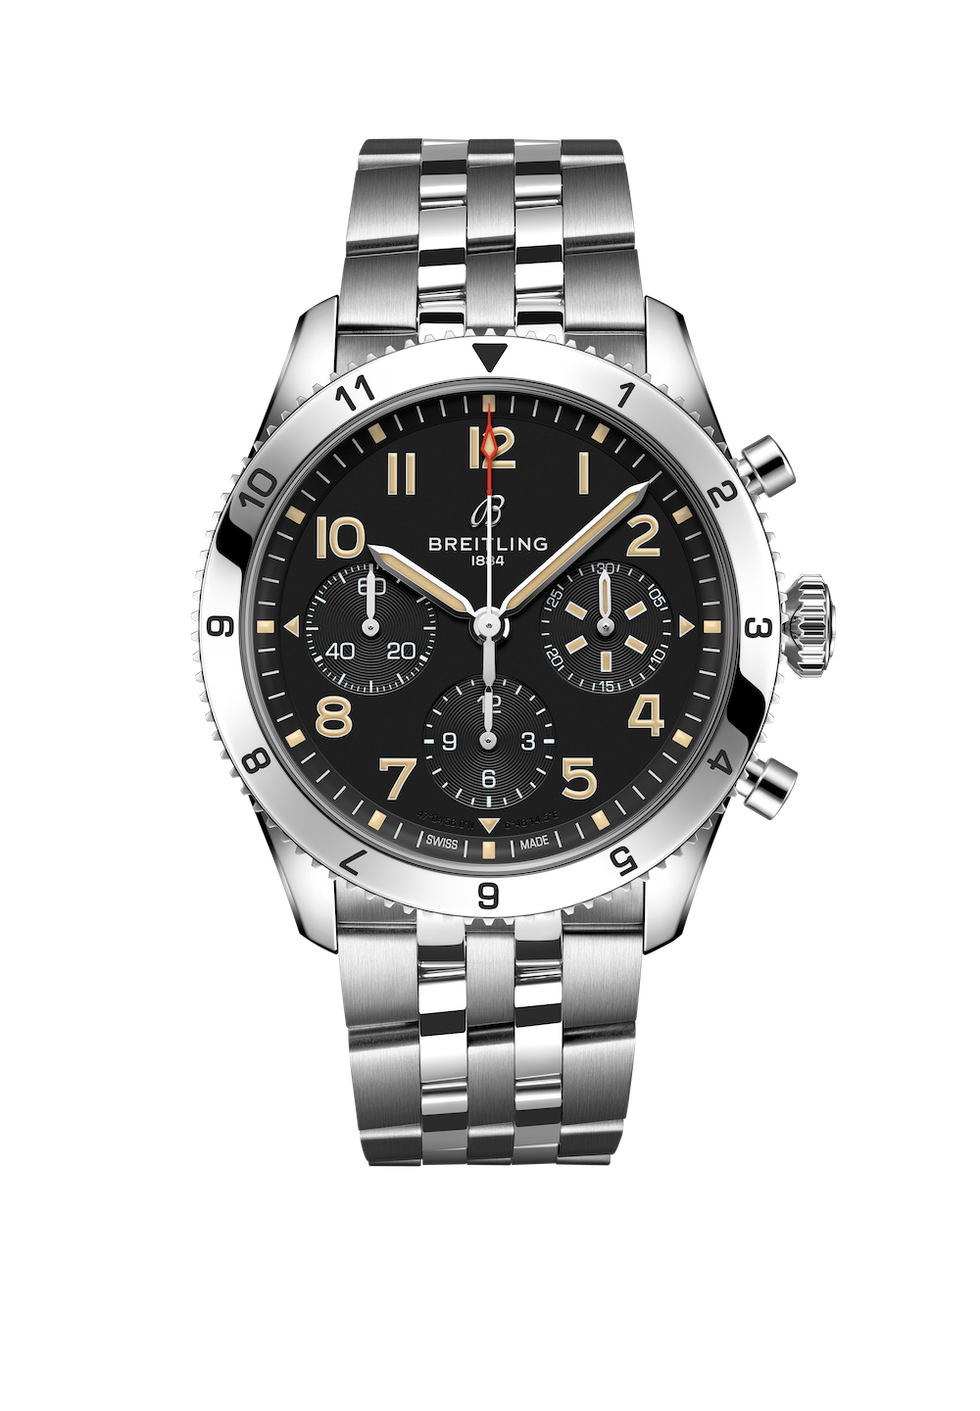 Introducing Breitling’s 70th Anniversary “Co-Pilot” Watches